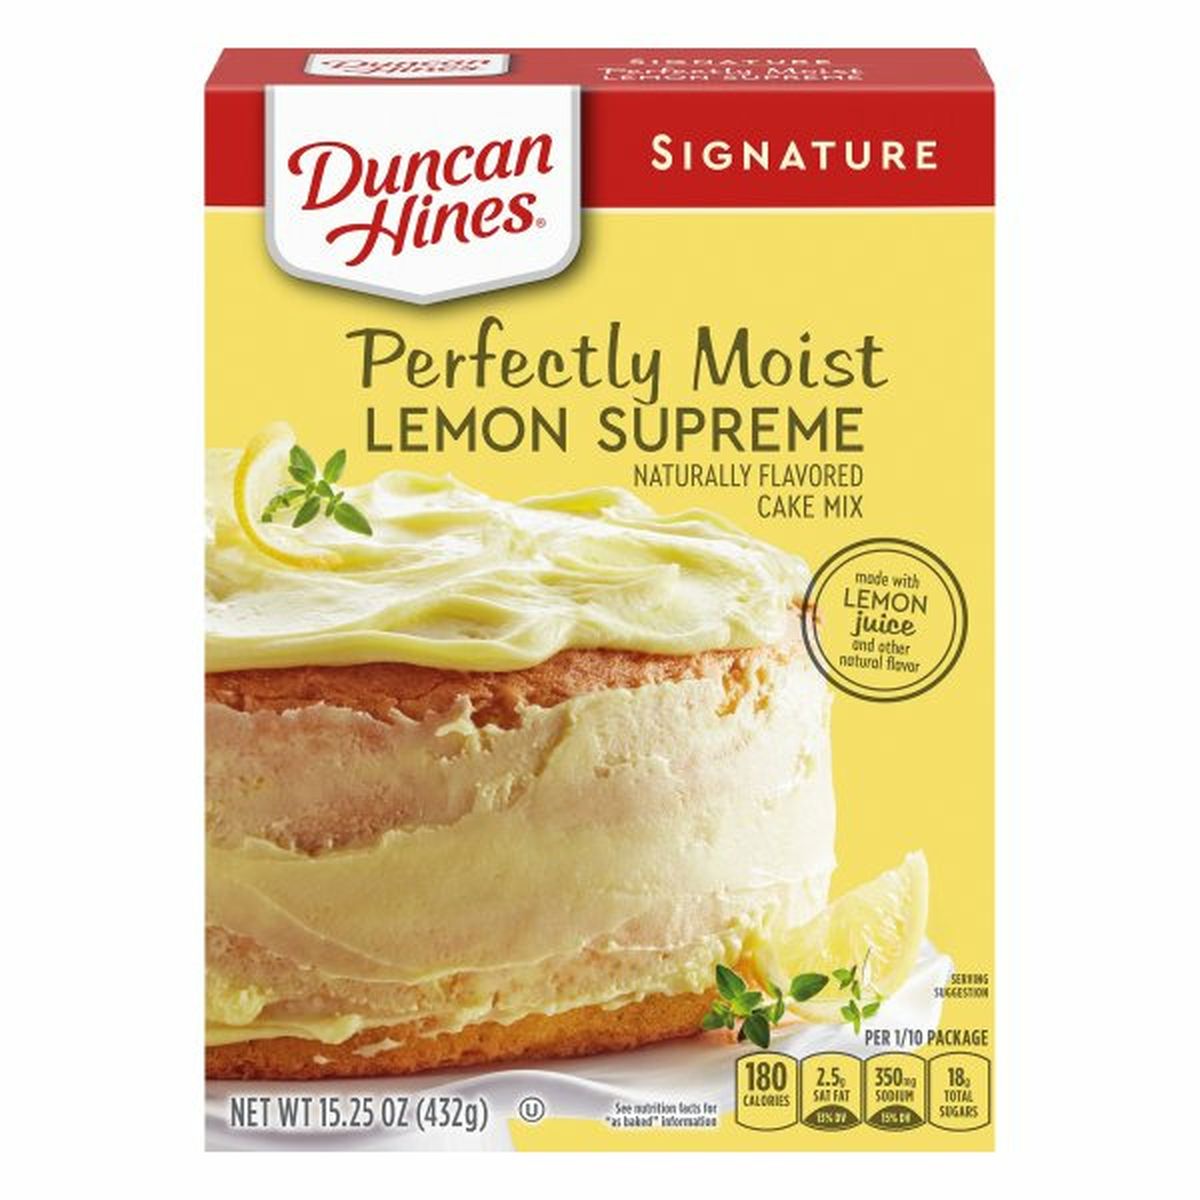 Calories in Duncan Hines Signature Cake Mix, Lemon Supreme, Perfectly Moist